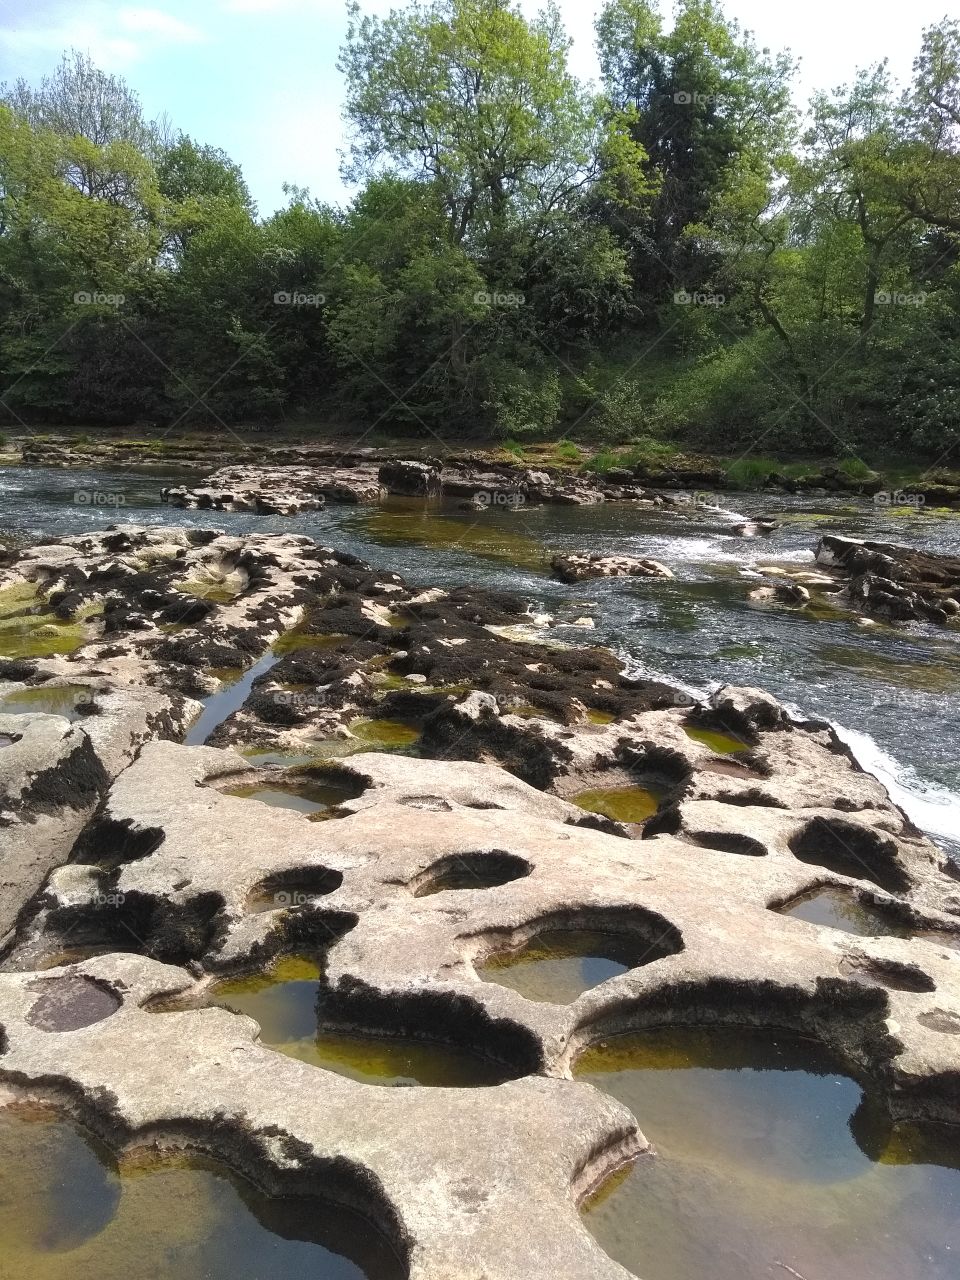 beautiful river with rock pools !!!